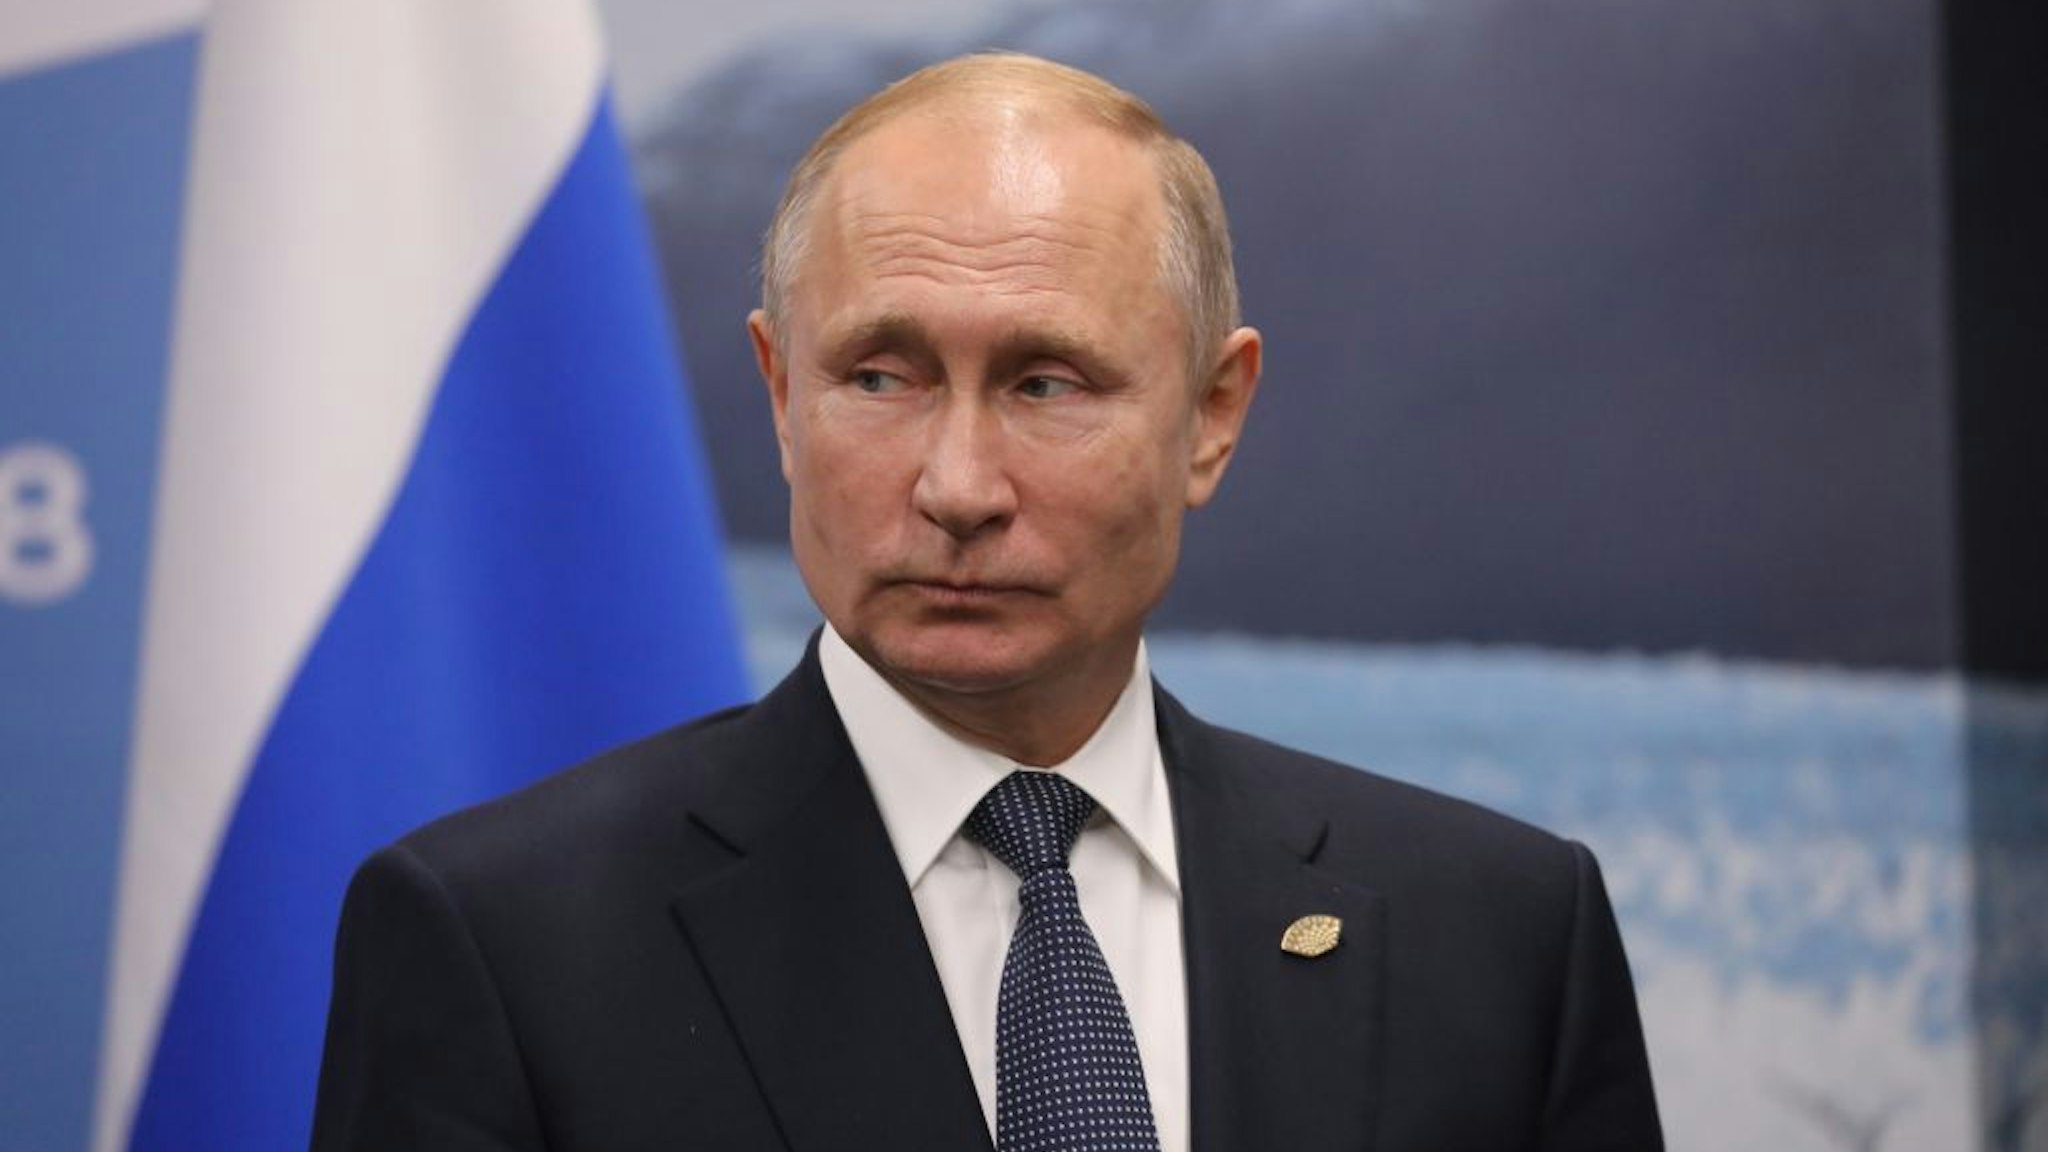 Russia's President Vladimir Putin gestures during a meeting with France's President Emmanuel Macron (out of frame) in the sidelines of the G20 Leaders' Summit in Buenos Aires, on November 30, 2018. - Global leaders gather in the Argentine capital for a two-day G20 summit beginning on Friday likely to be dominated by simmering international tensions over trade. (Photo by Ludovic MARIN / AFP) (Photo credit should read LUDOVIC MARIN/AFP via Getty Images)